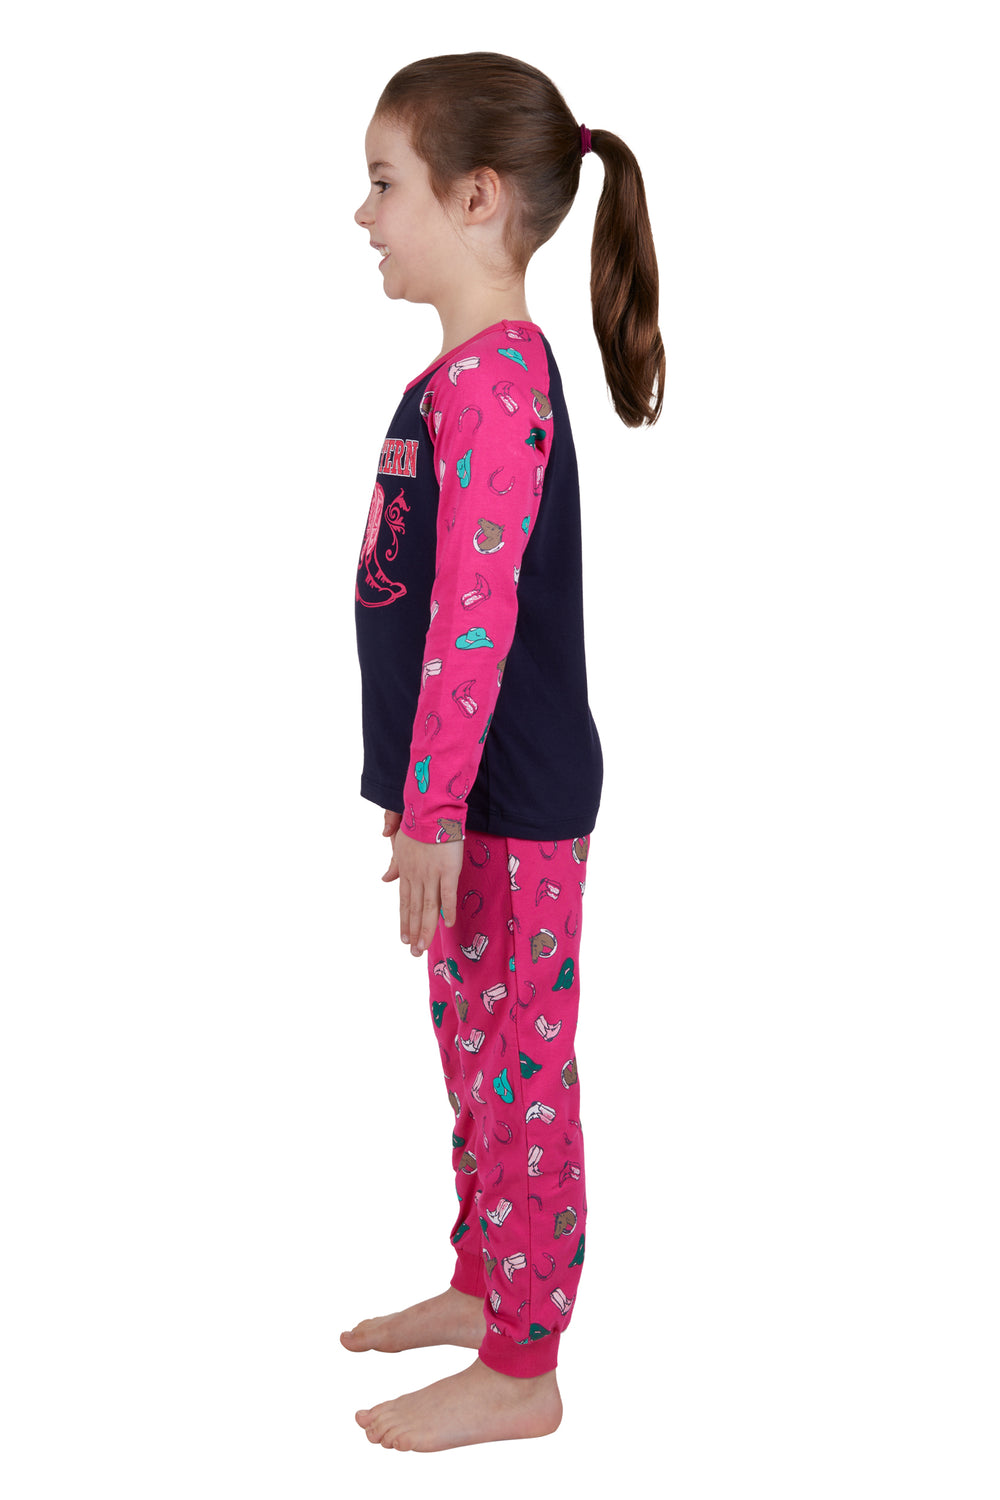 Pure Western - Girls Boots PJ's